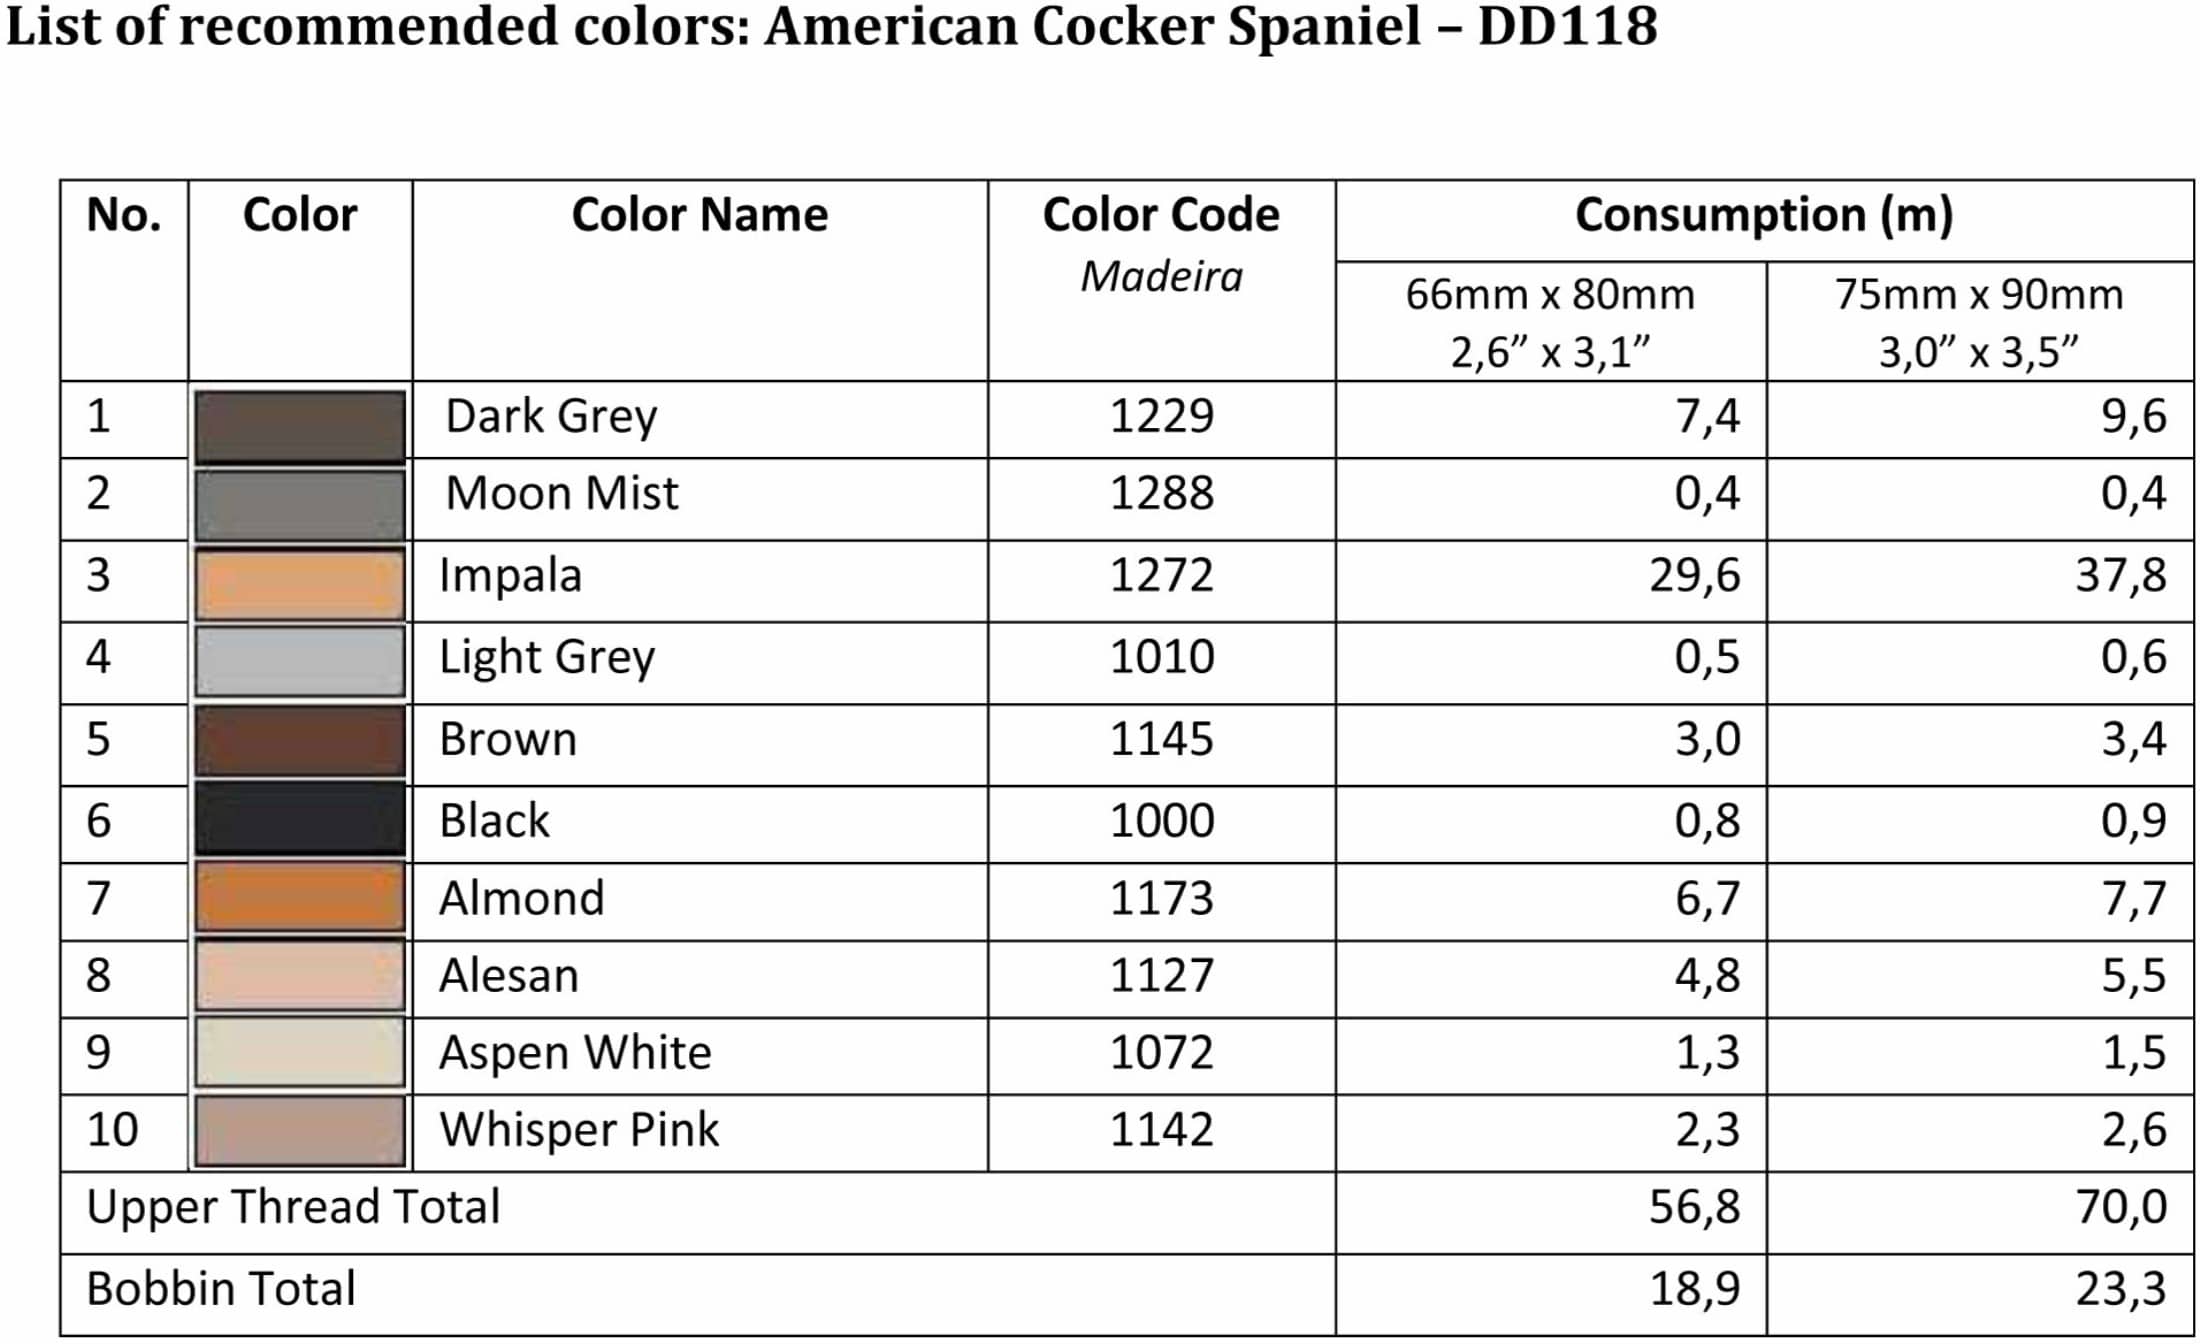 List of Recommended Colors - American Cocker Spaniel  DD118